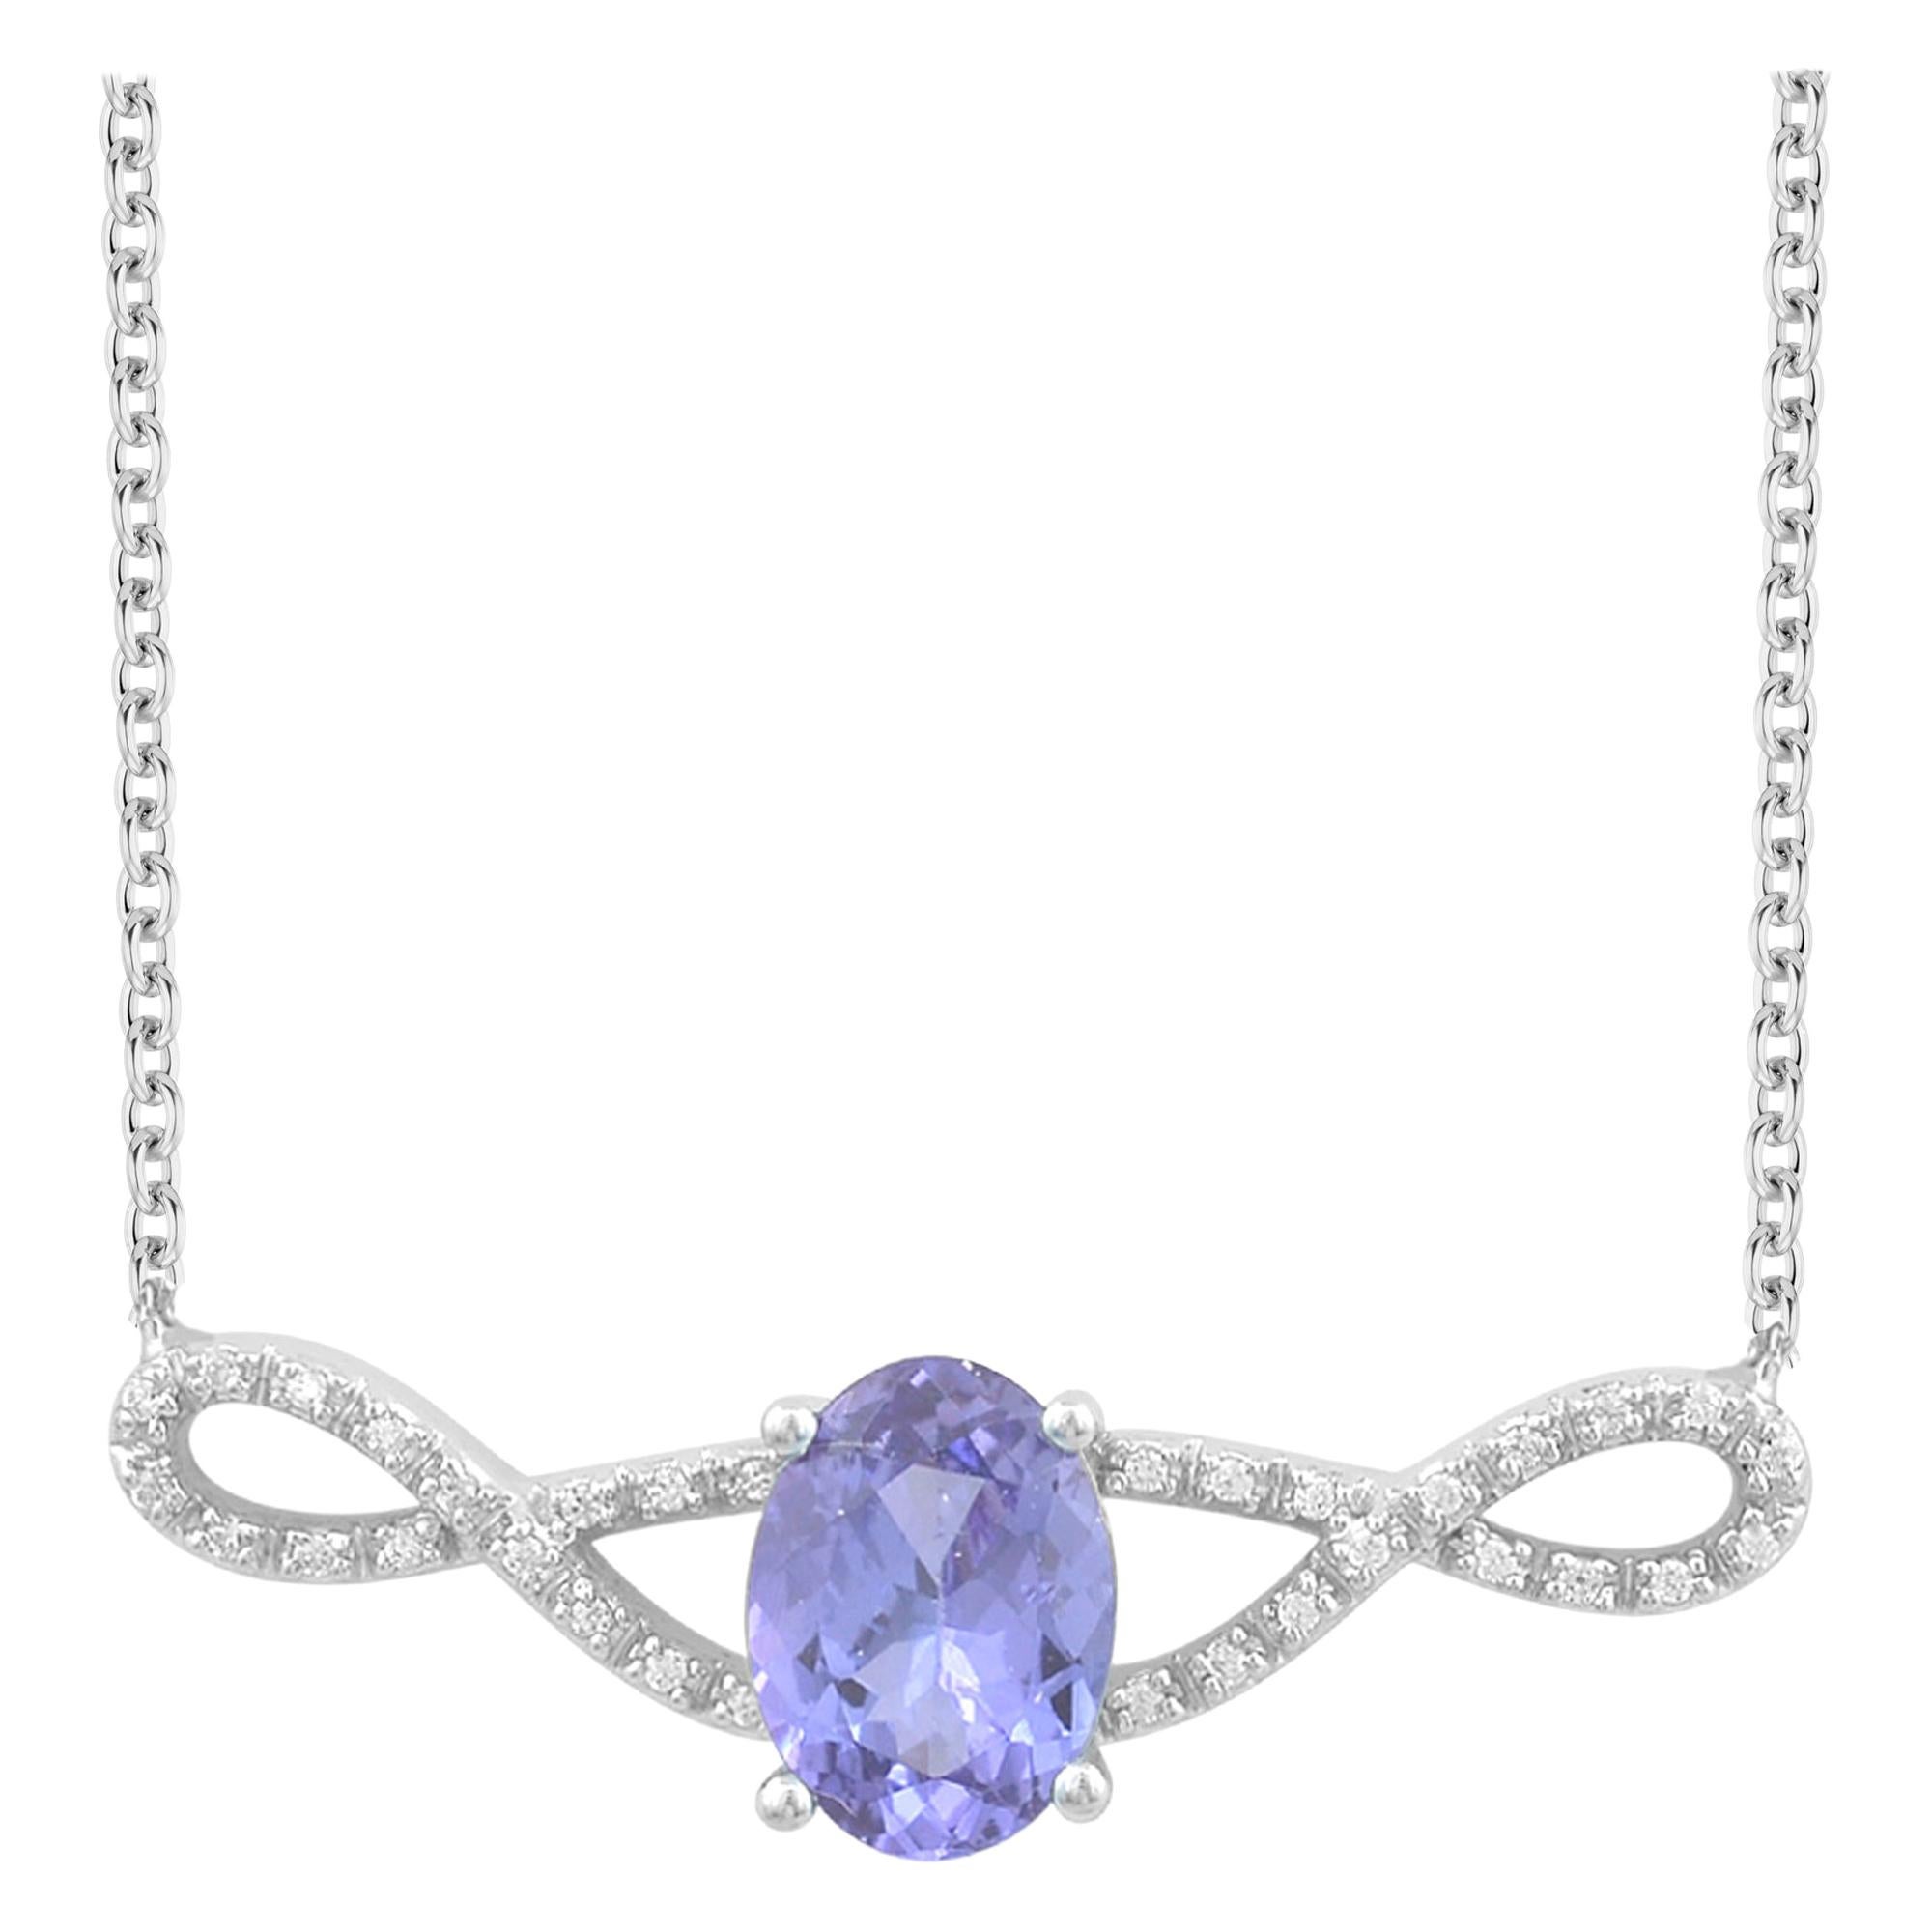 TJD 0.08 Carat Diamond and 8X6MM Oval Tanzanite 14K White Gold Infinity Necklace For Sale